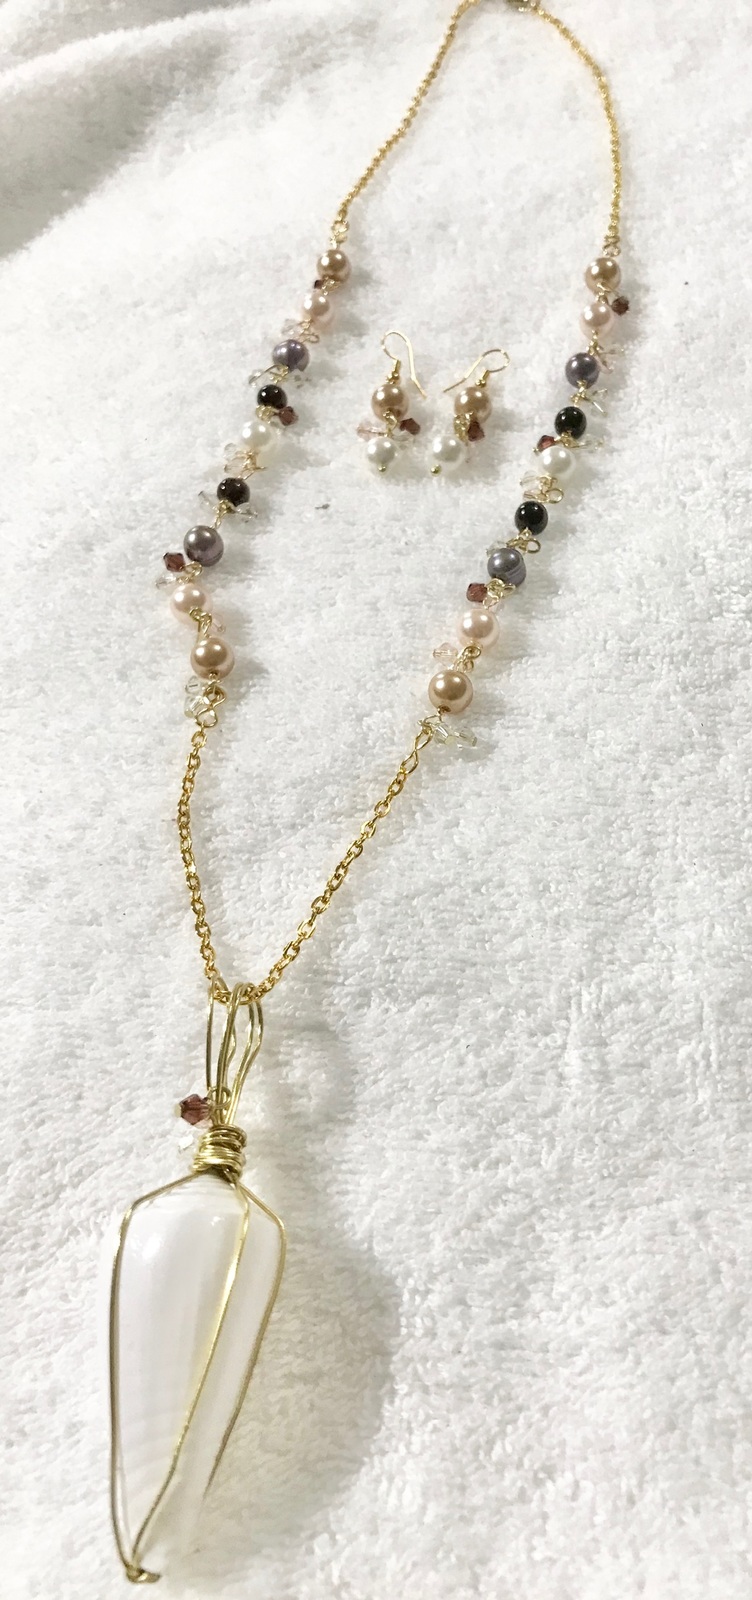 Primary image for Gold Plated Swarovski Pearl Necklace Set With Wire Wrapped Seashell Pendant 